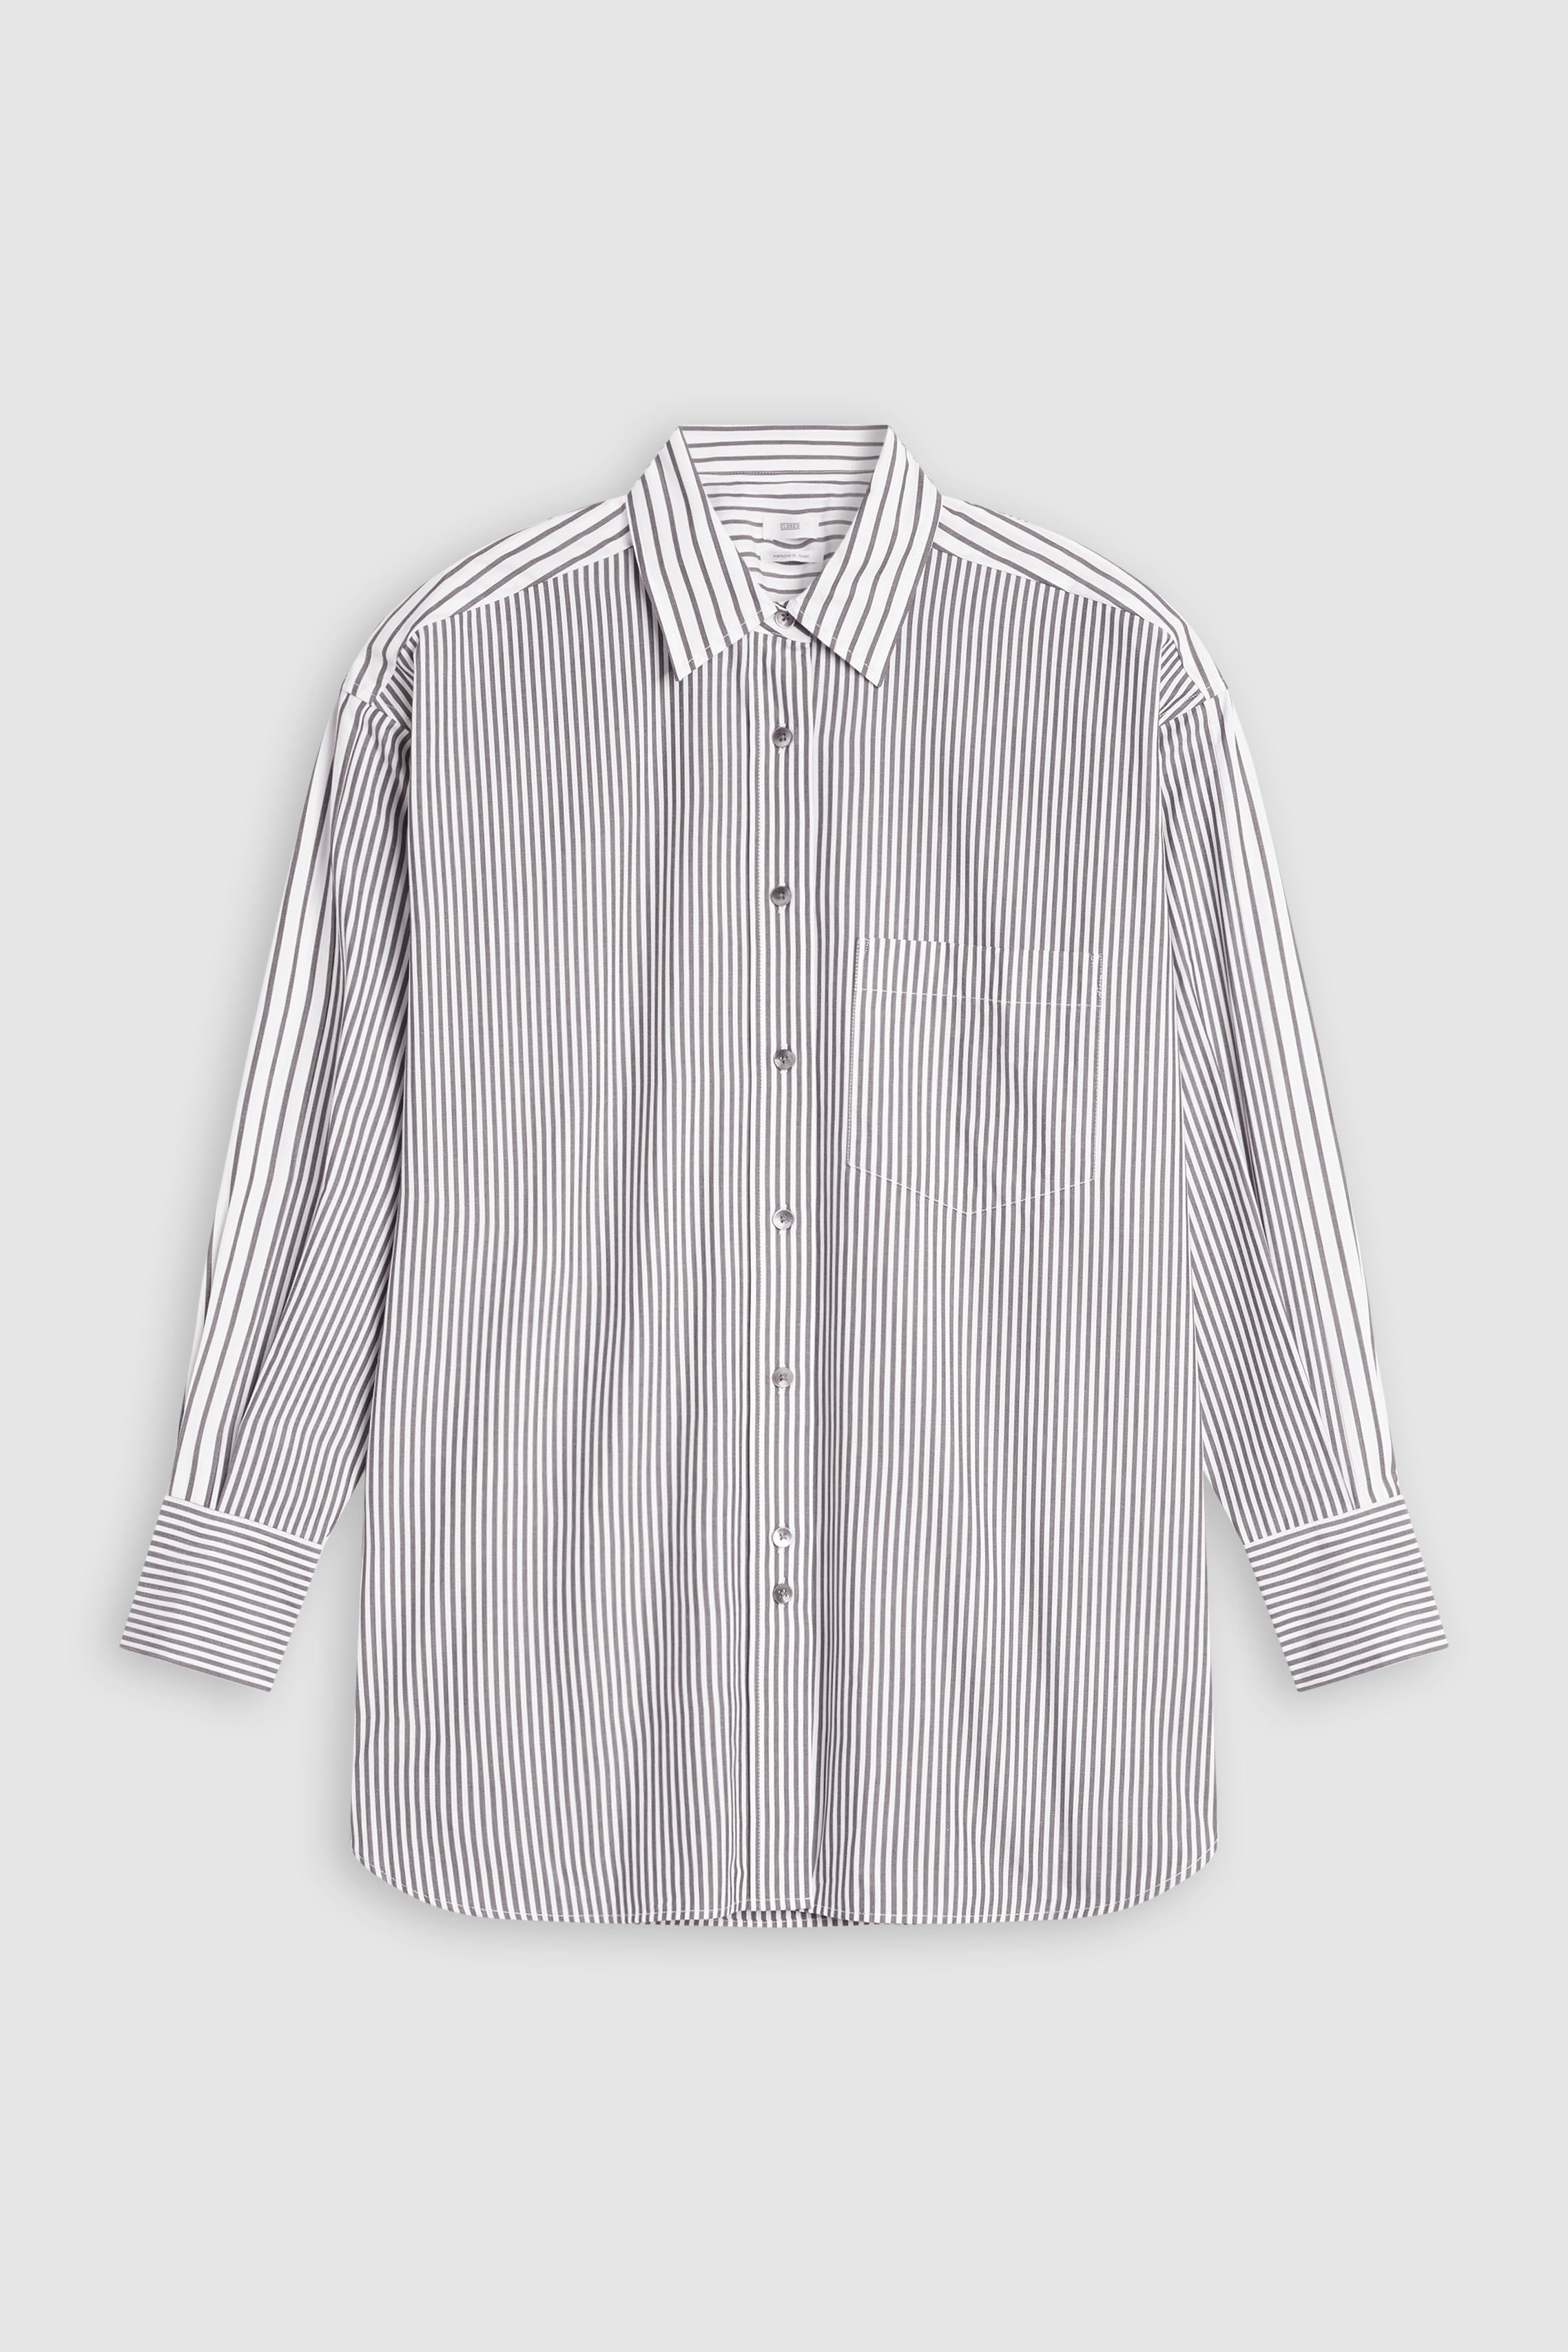 Look sharp in this Chestpocket Long Sleeve Blouse from Closed. Crafted with luxury in mind, this blouse is made from sustainable Portuguese cotton for a soft, comfortable feel. Bold stripes and pearl buttons add a timeless look, while chest pockets and side slits provide versatile styling options.